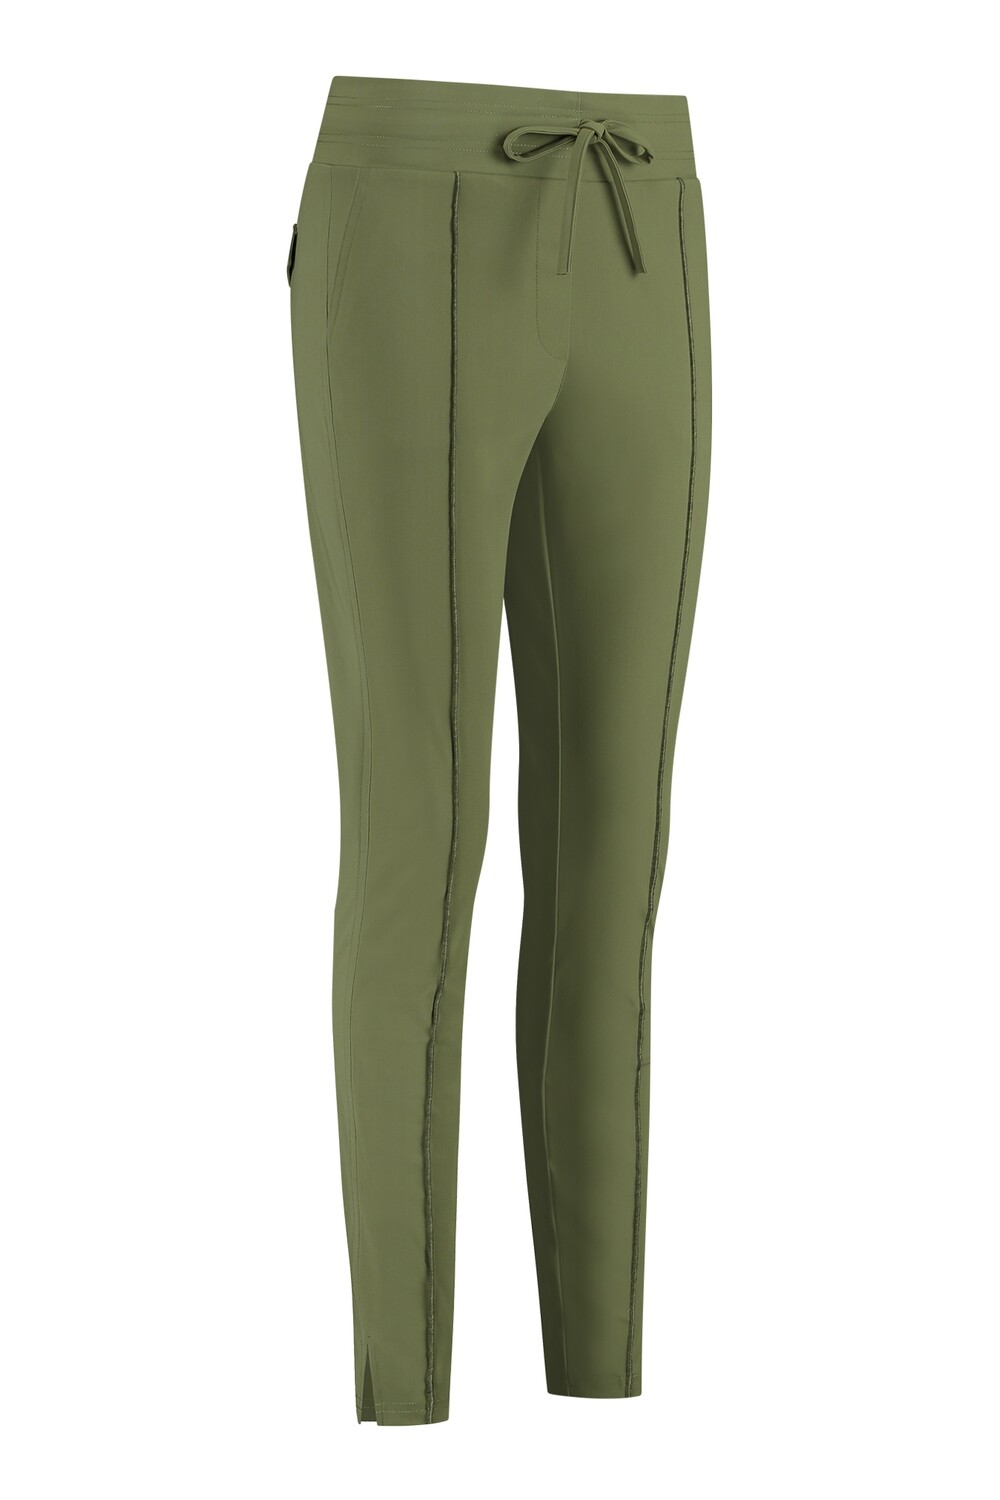 Uptown trousers, army